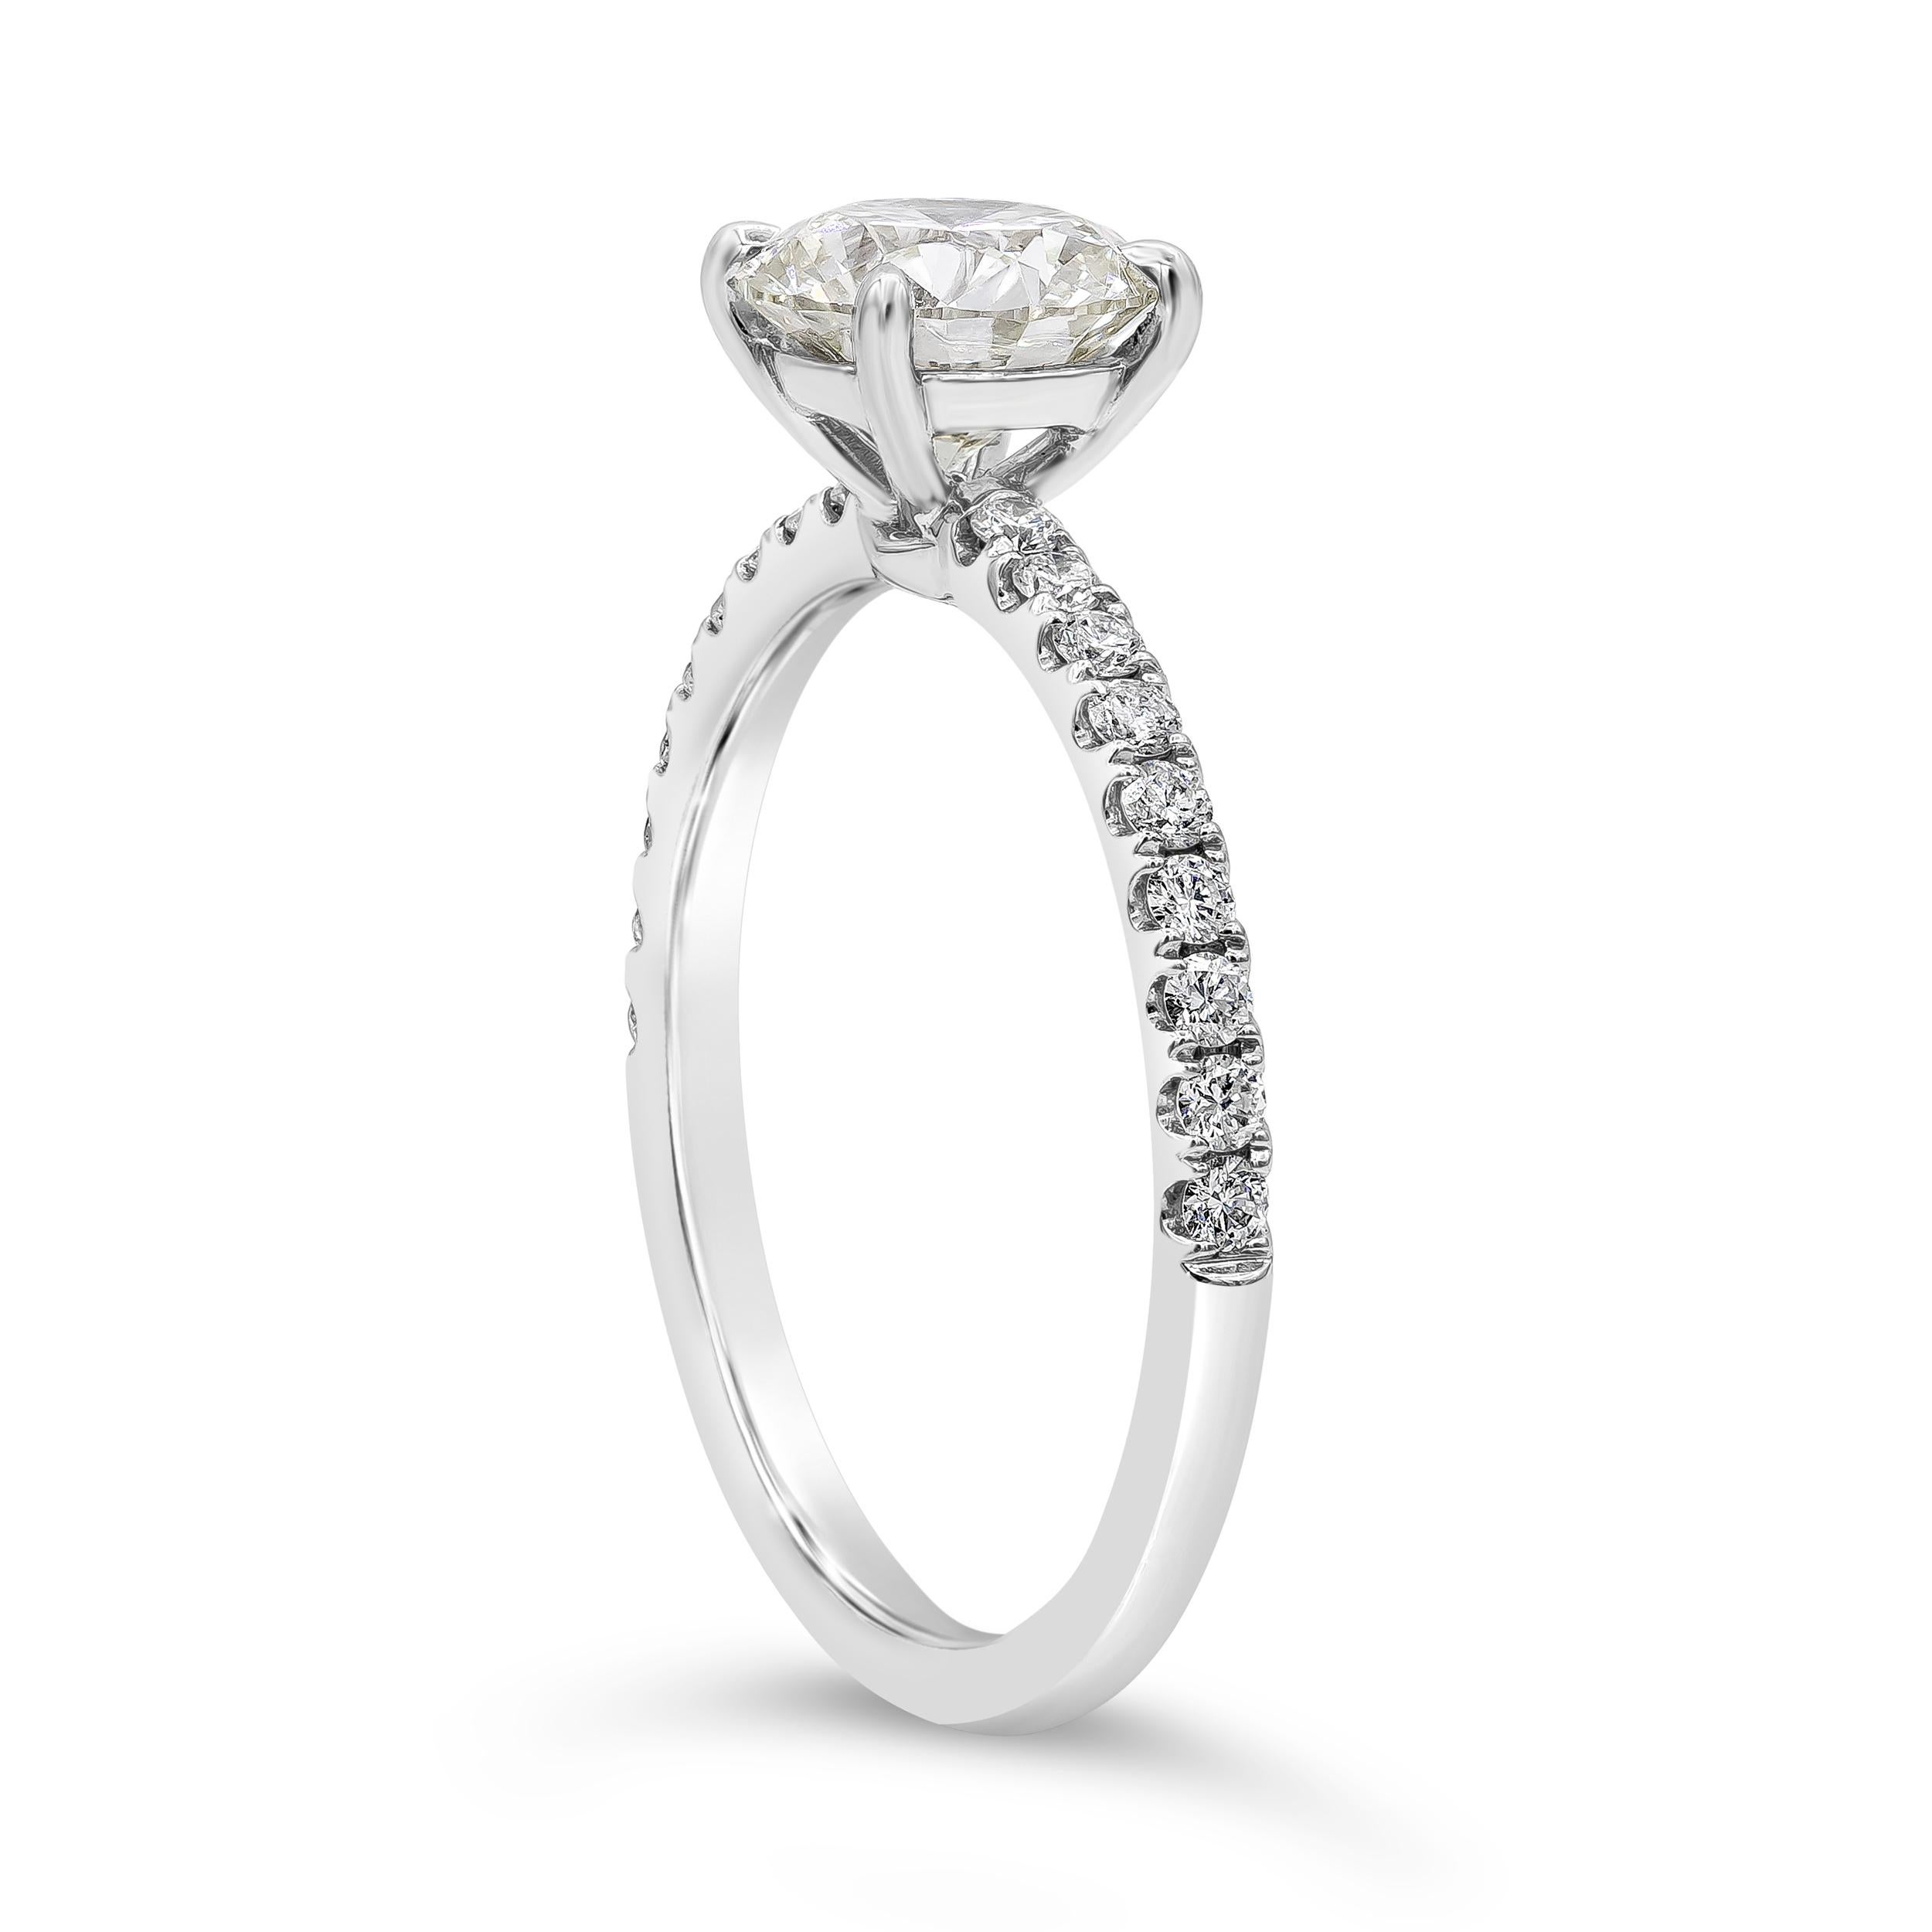 A classic engagement ring style showcasing a GIA Certified 1.27 carat brilliant round diamond, L Color and VVS1 in Clarity. Accenting the center diamond are round melee diamonds pave set half-way down the band weighing 0.28 carats total, Made with